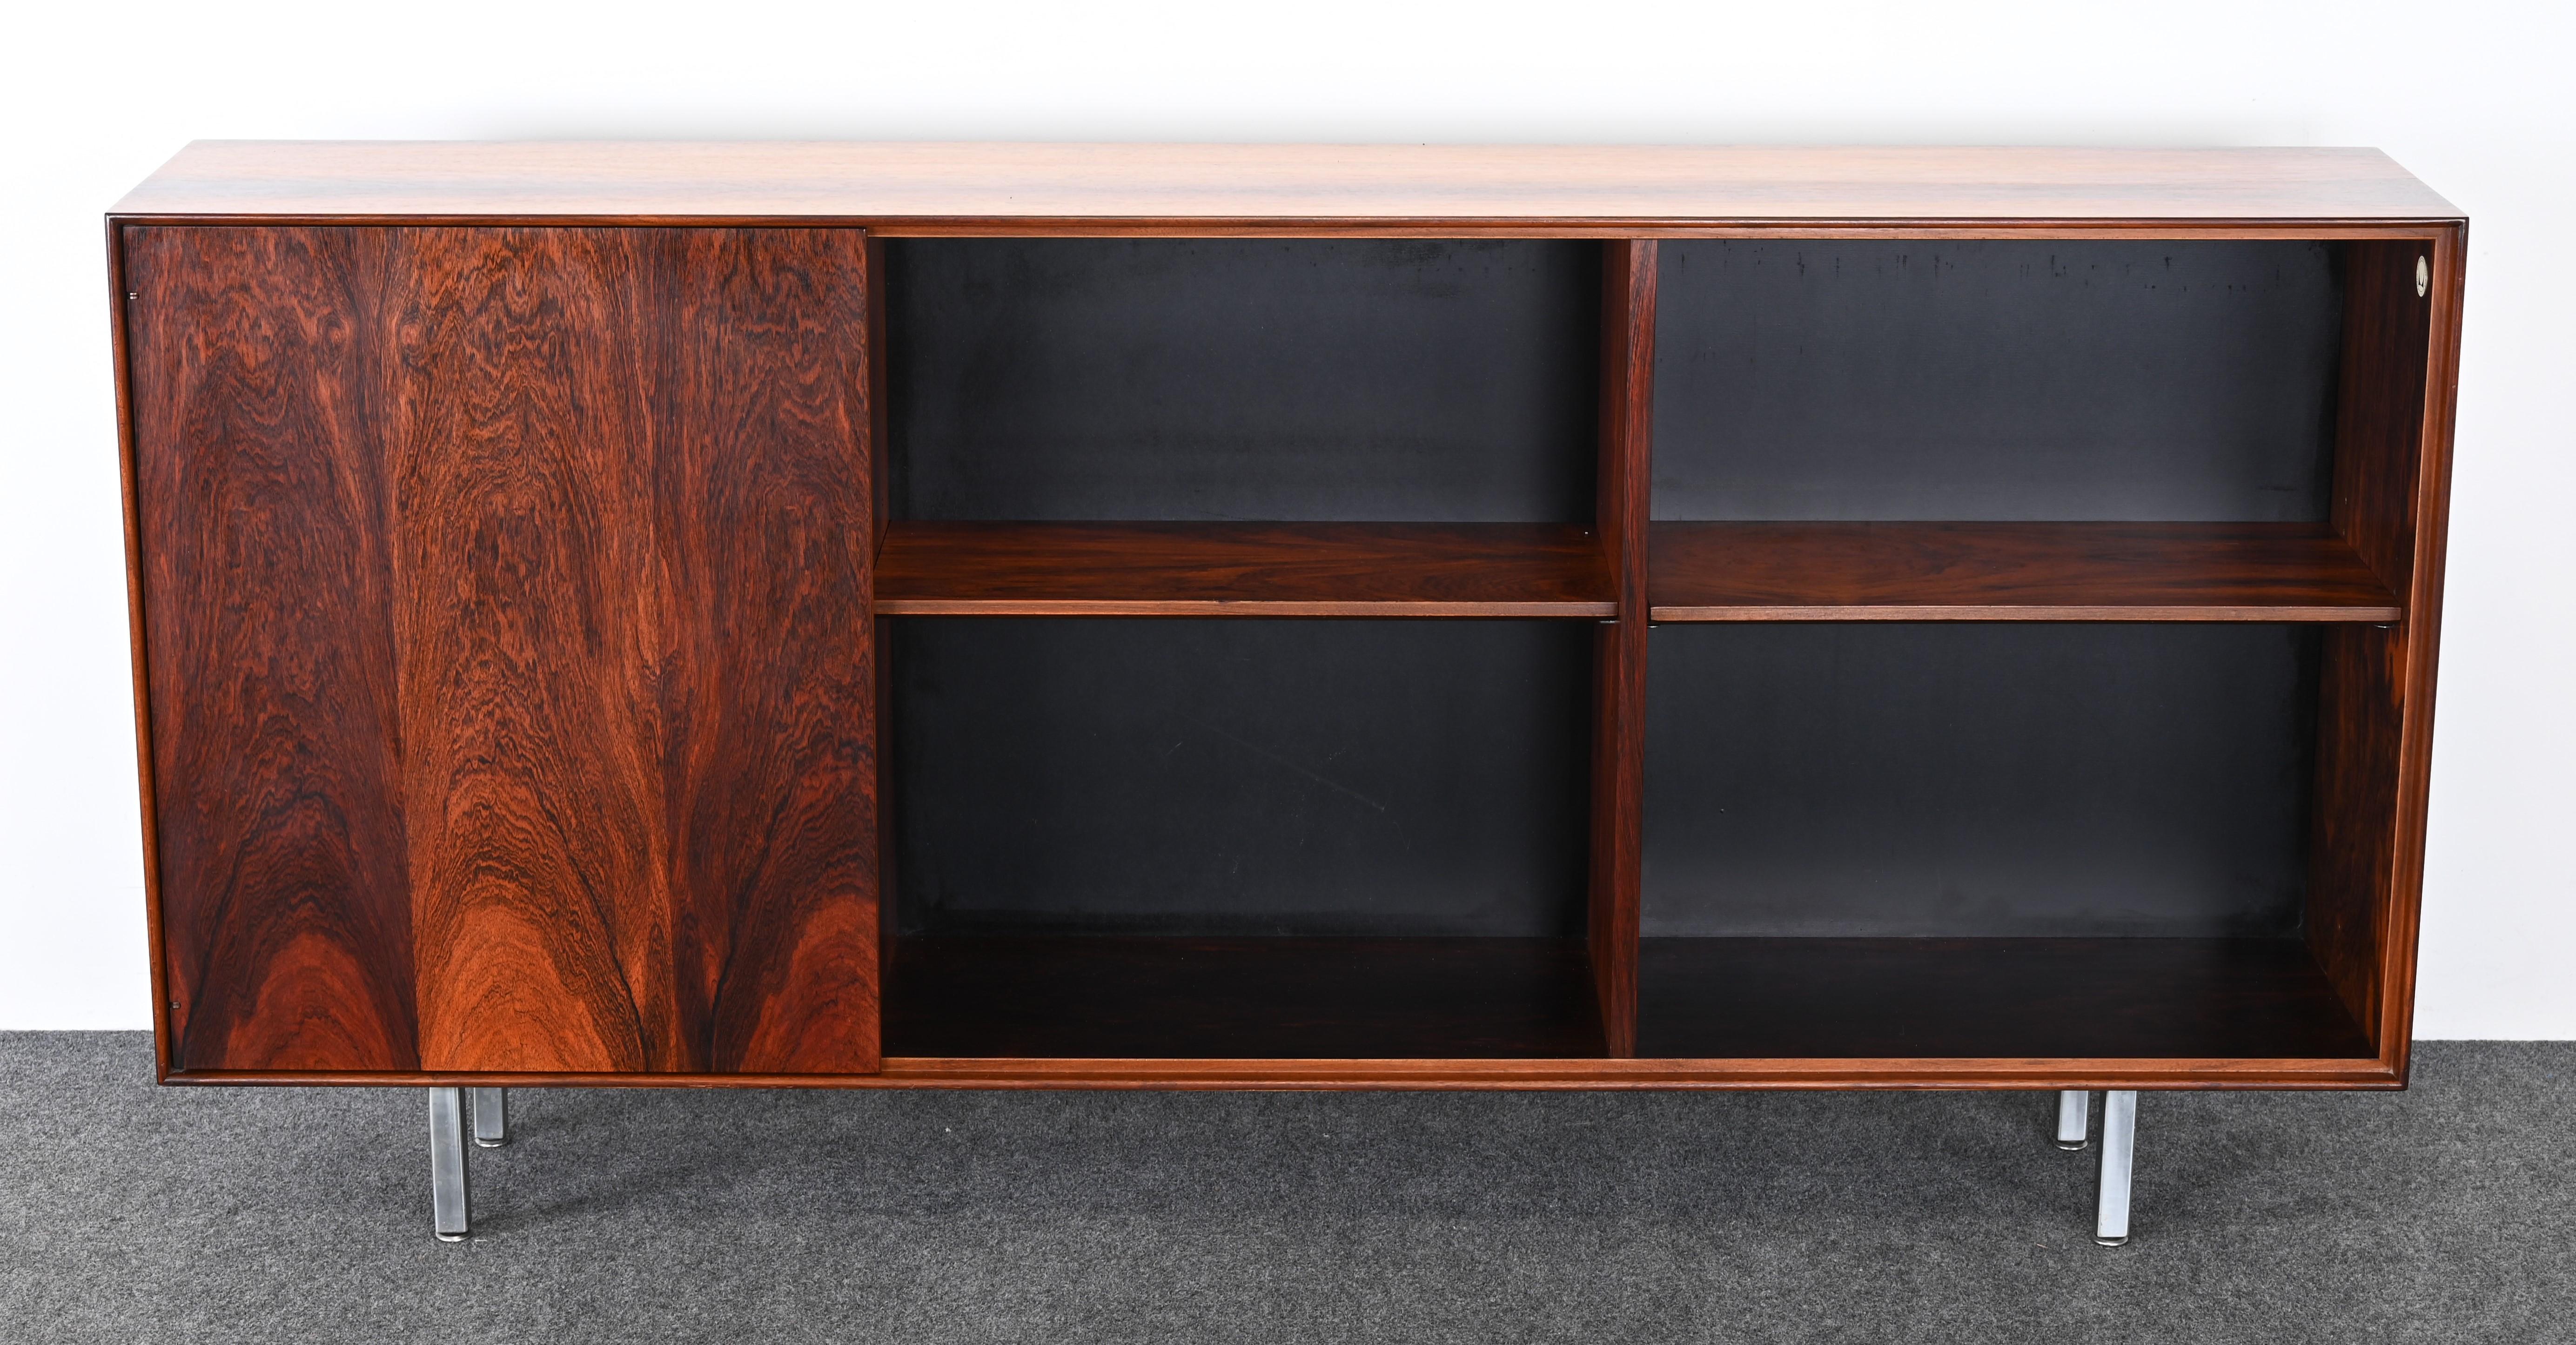 Rosewood Thin Edge Bookshelf by George Nelson for Herman Miller, 1950s In Good Condition For Sale In Hamburg, PA